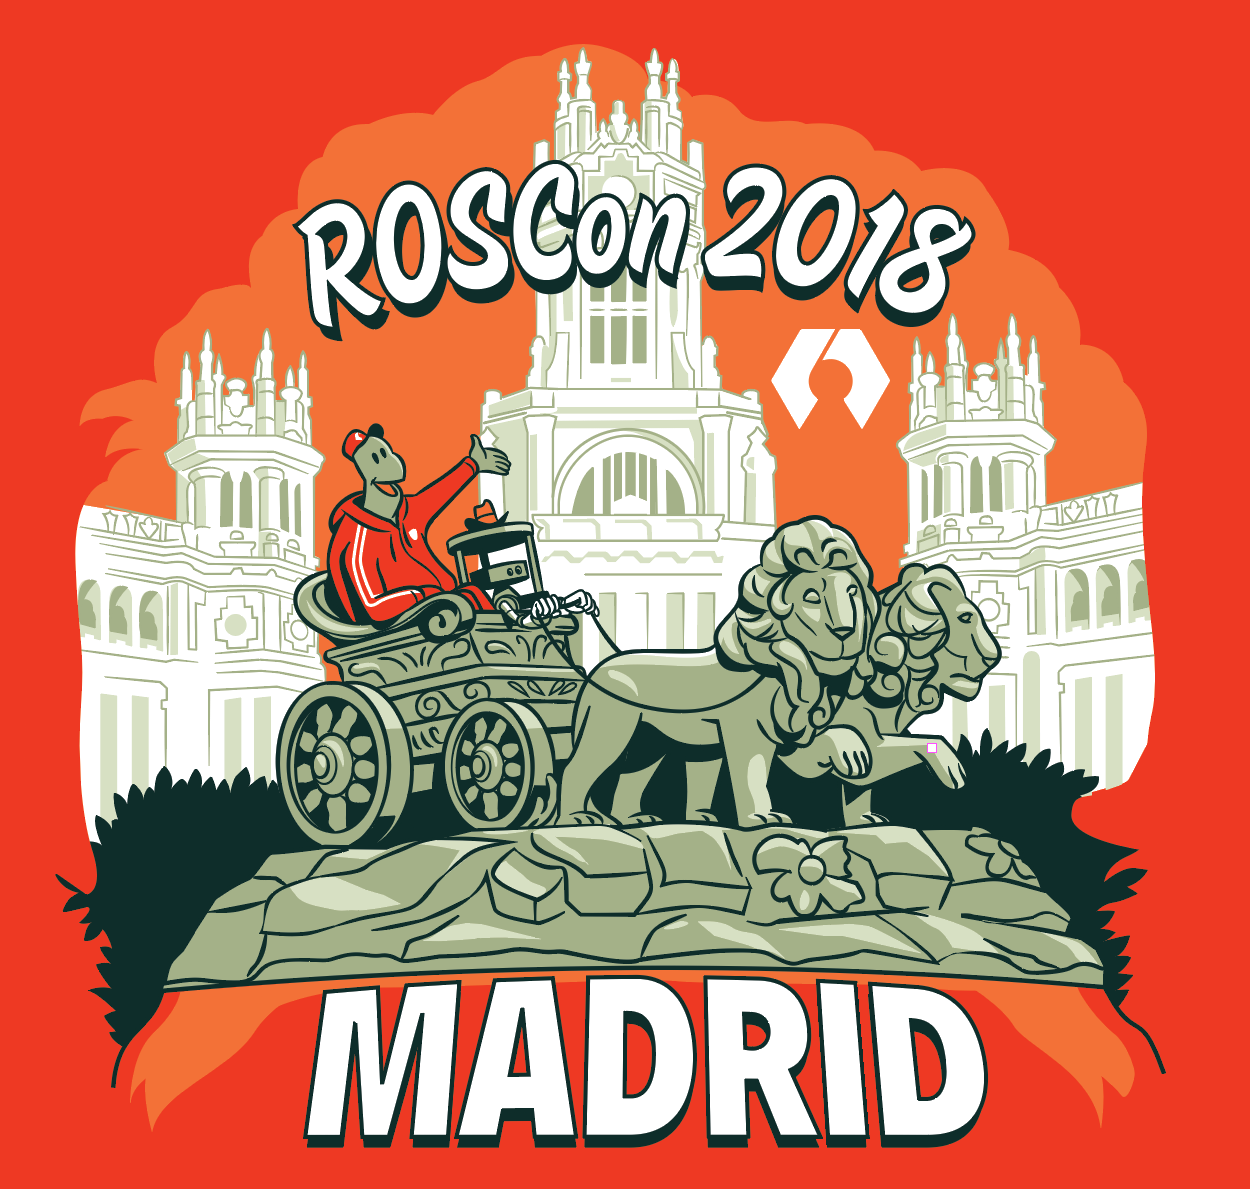 http://www.ros.org/news/2018/04/25/ROSConMadrid.png